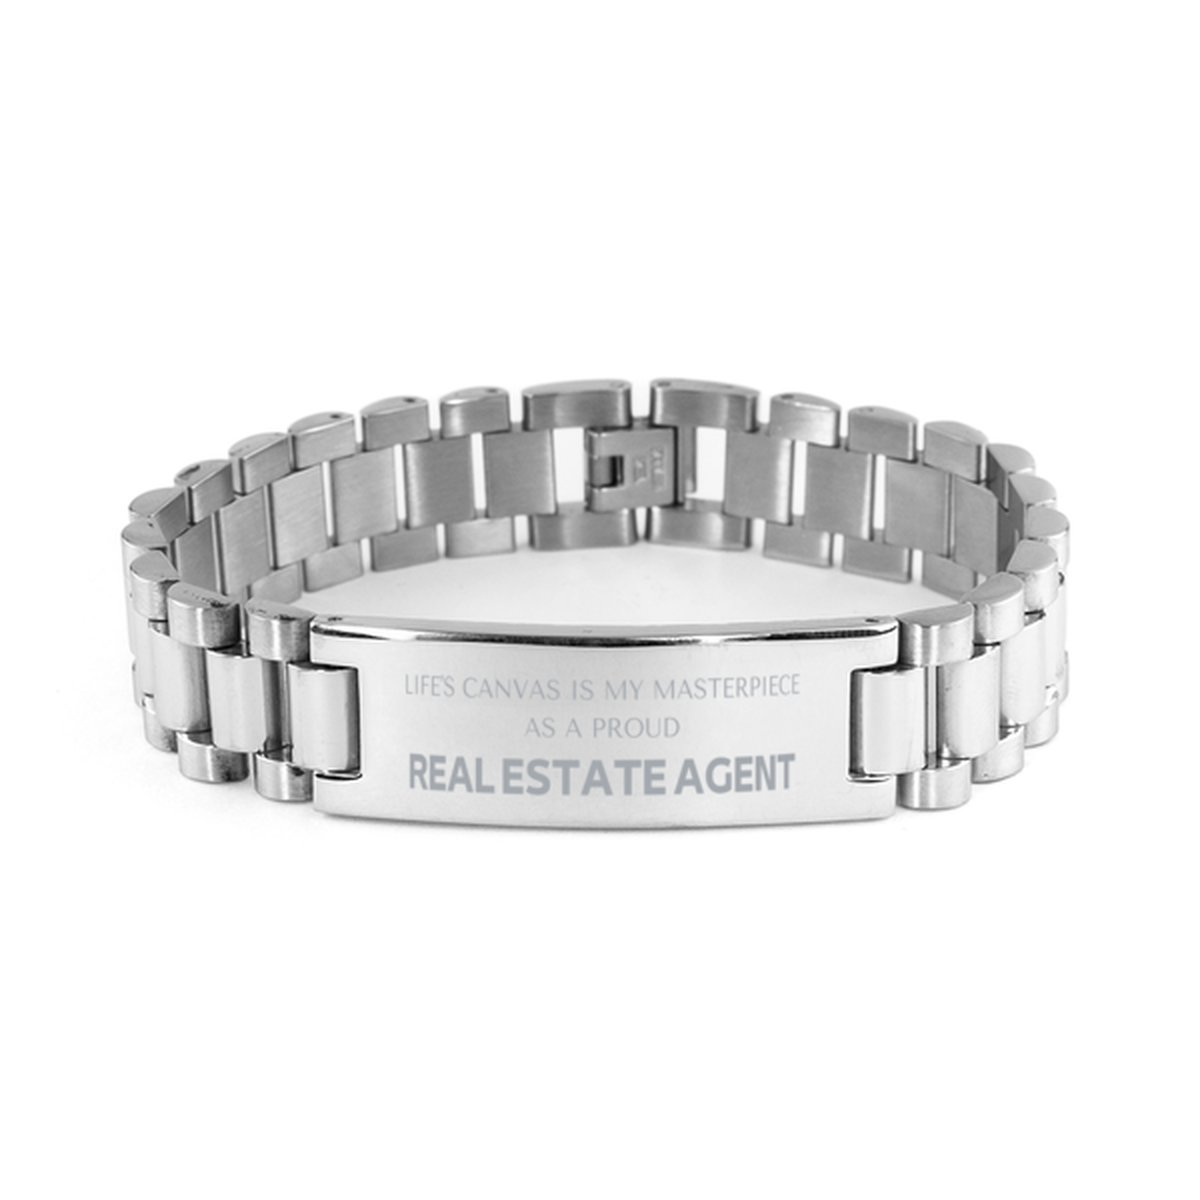 Proud Real Estate Agent Gifts, Life's canvas is my masterpiece, Epic Birthday Christmas Unique Ladder Stainless Steel Bracelet For Real Estate Agent, Coworkers, Men, Women, Friends